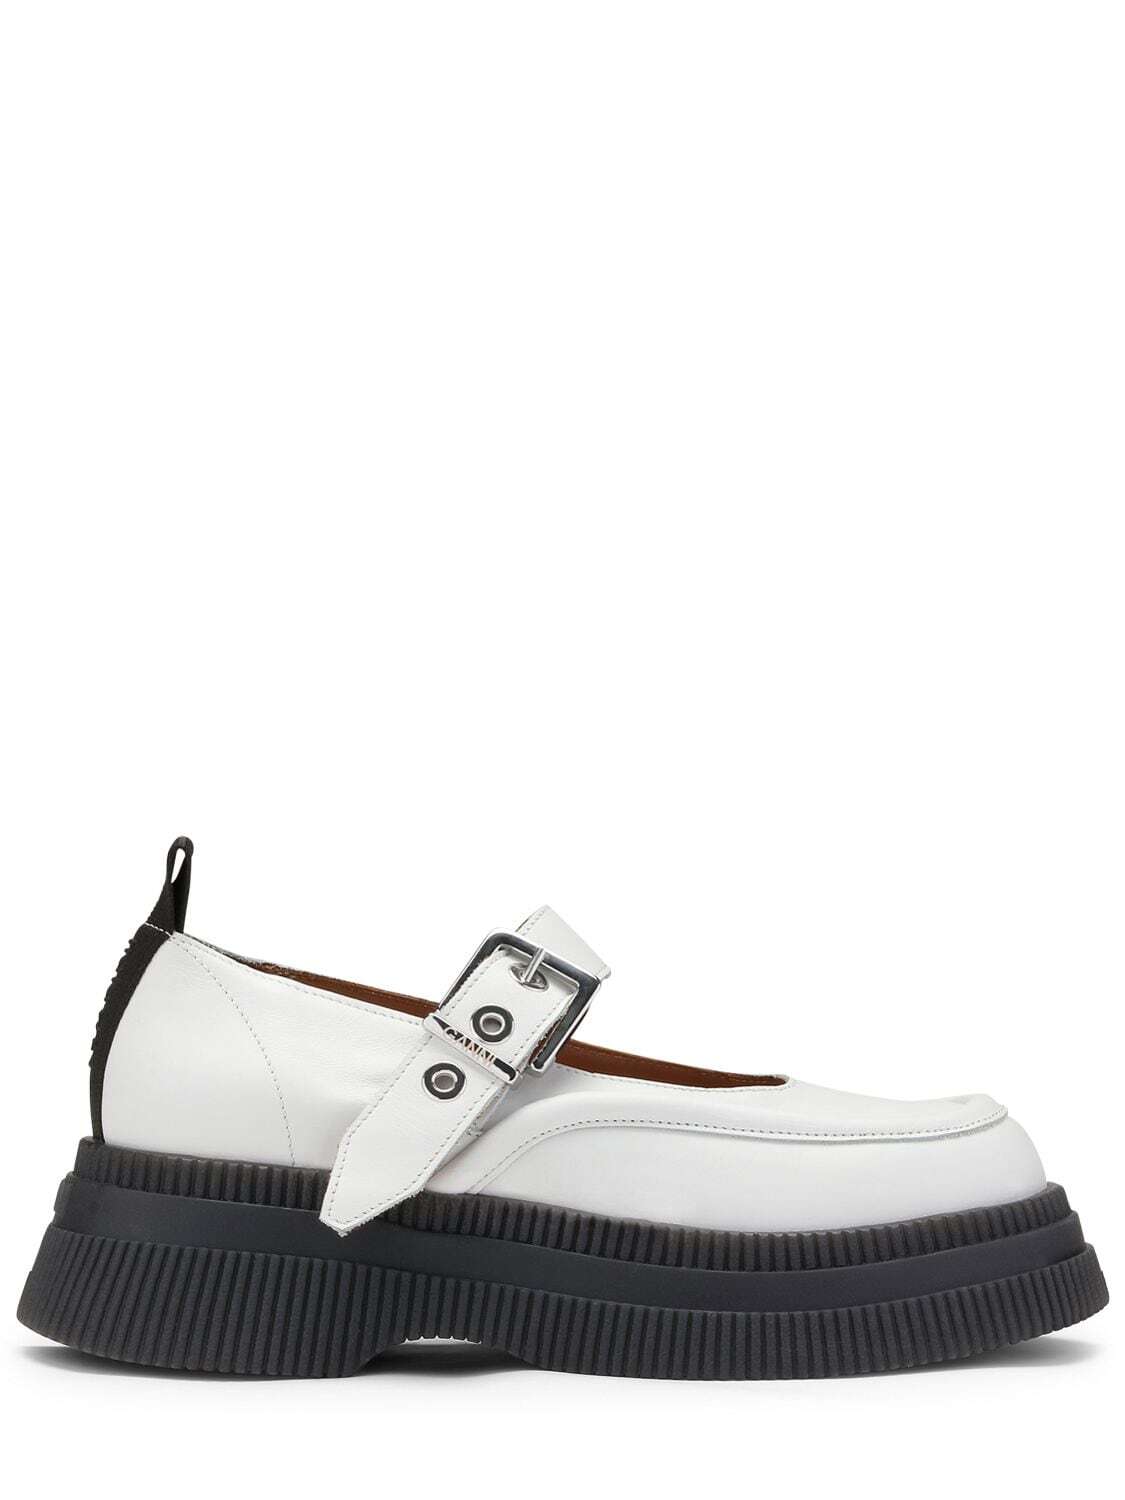 GANNI 55mm Leather Mary Jane Loafers in white